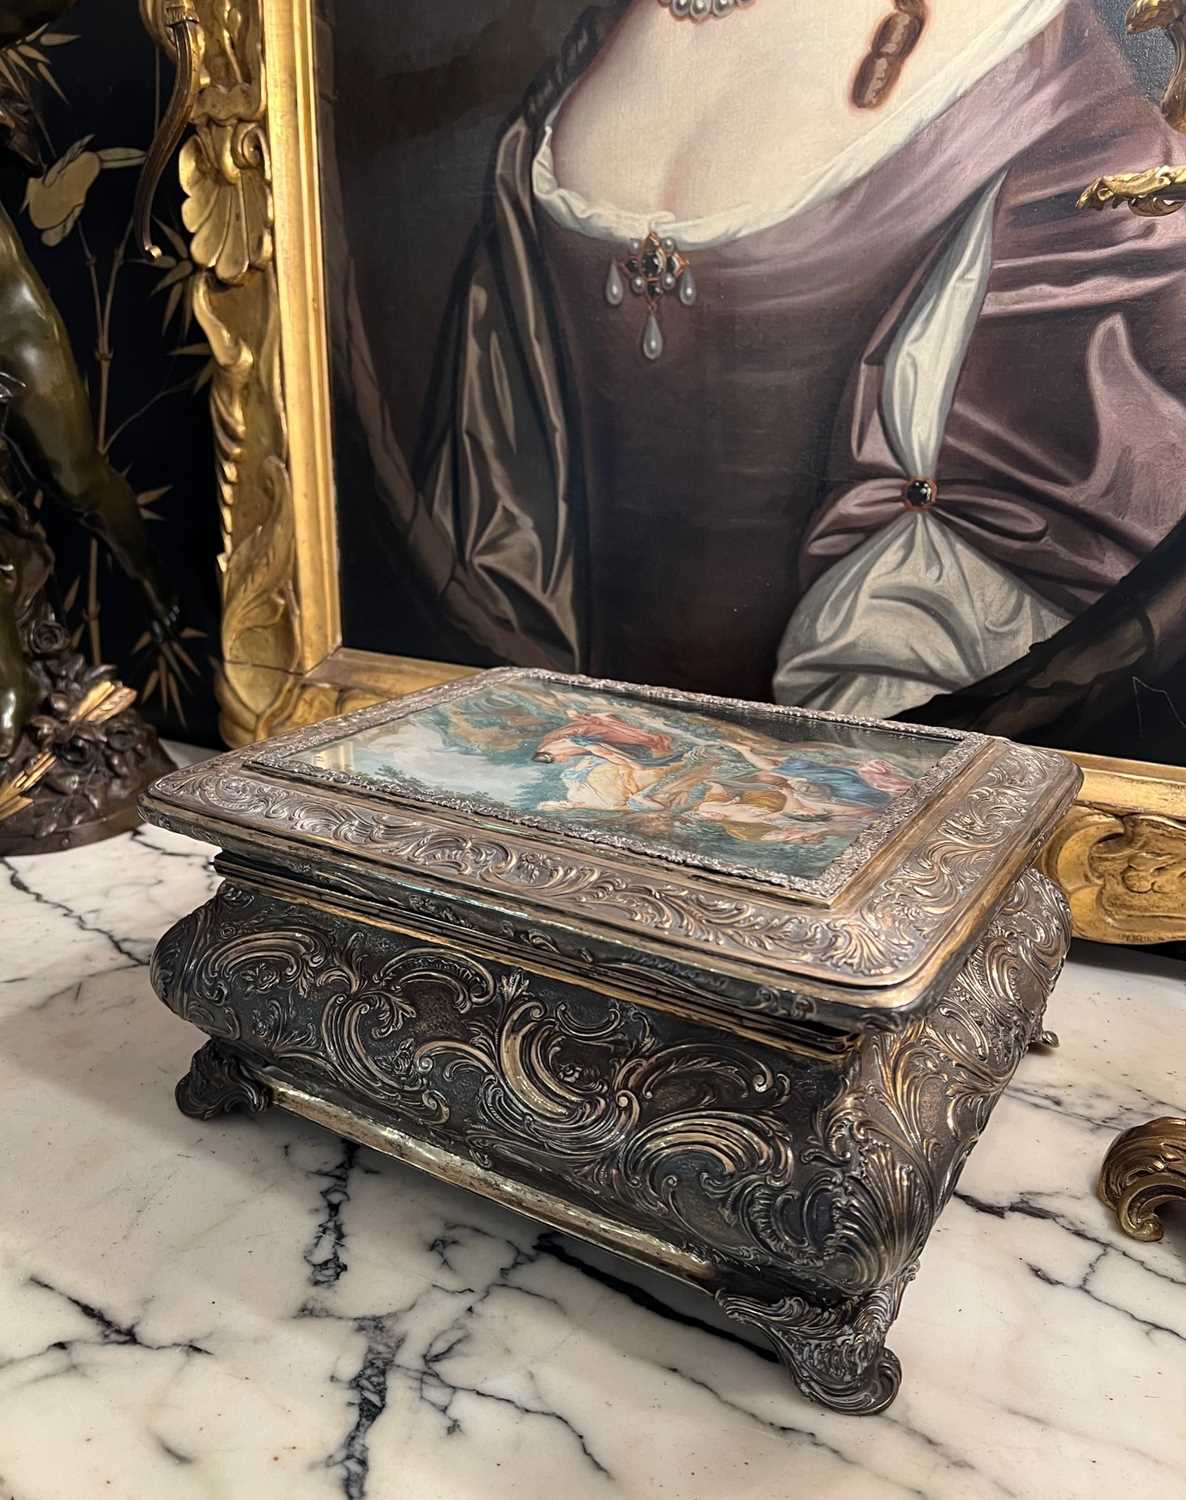 AN 18TH / 19TH CENTURY SILVER, SILVER GILT AND PAINTED TABLE CASKET - Image 5 of 15